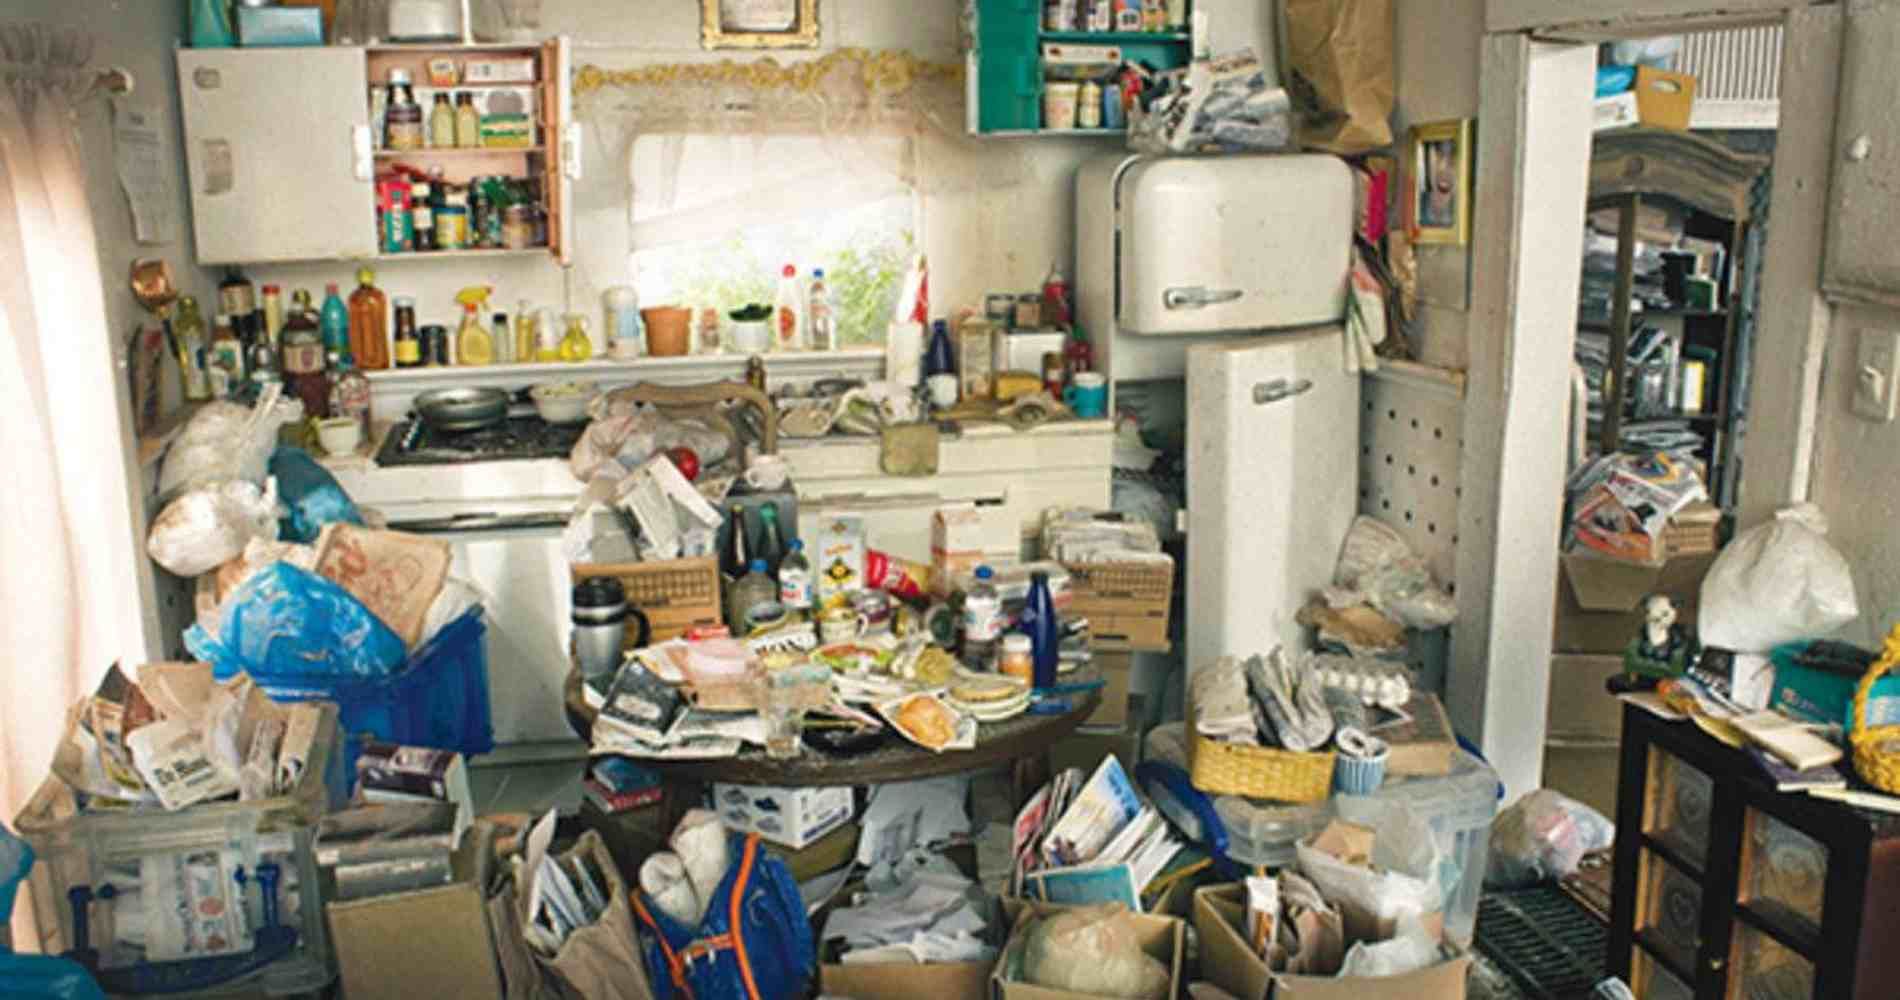 #1 for Hoarding Cleanup in Waddell, AZ with Over 1200 5-Star Reviews!